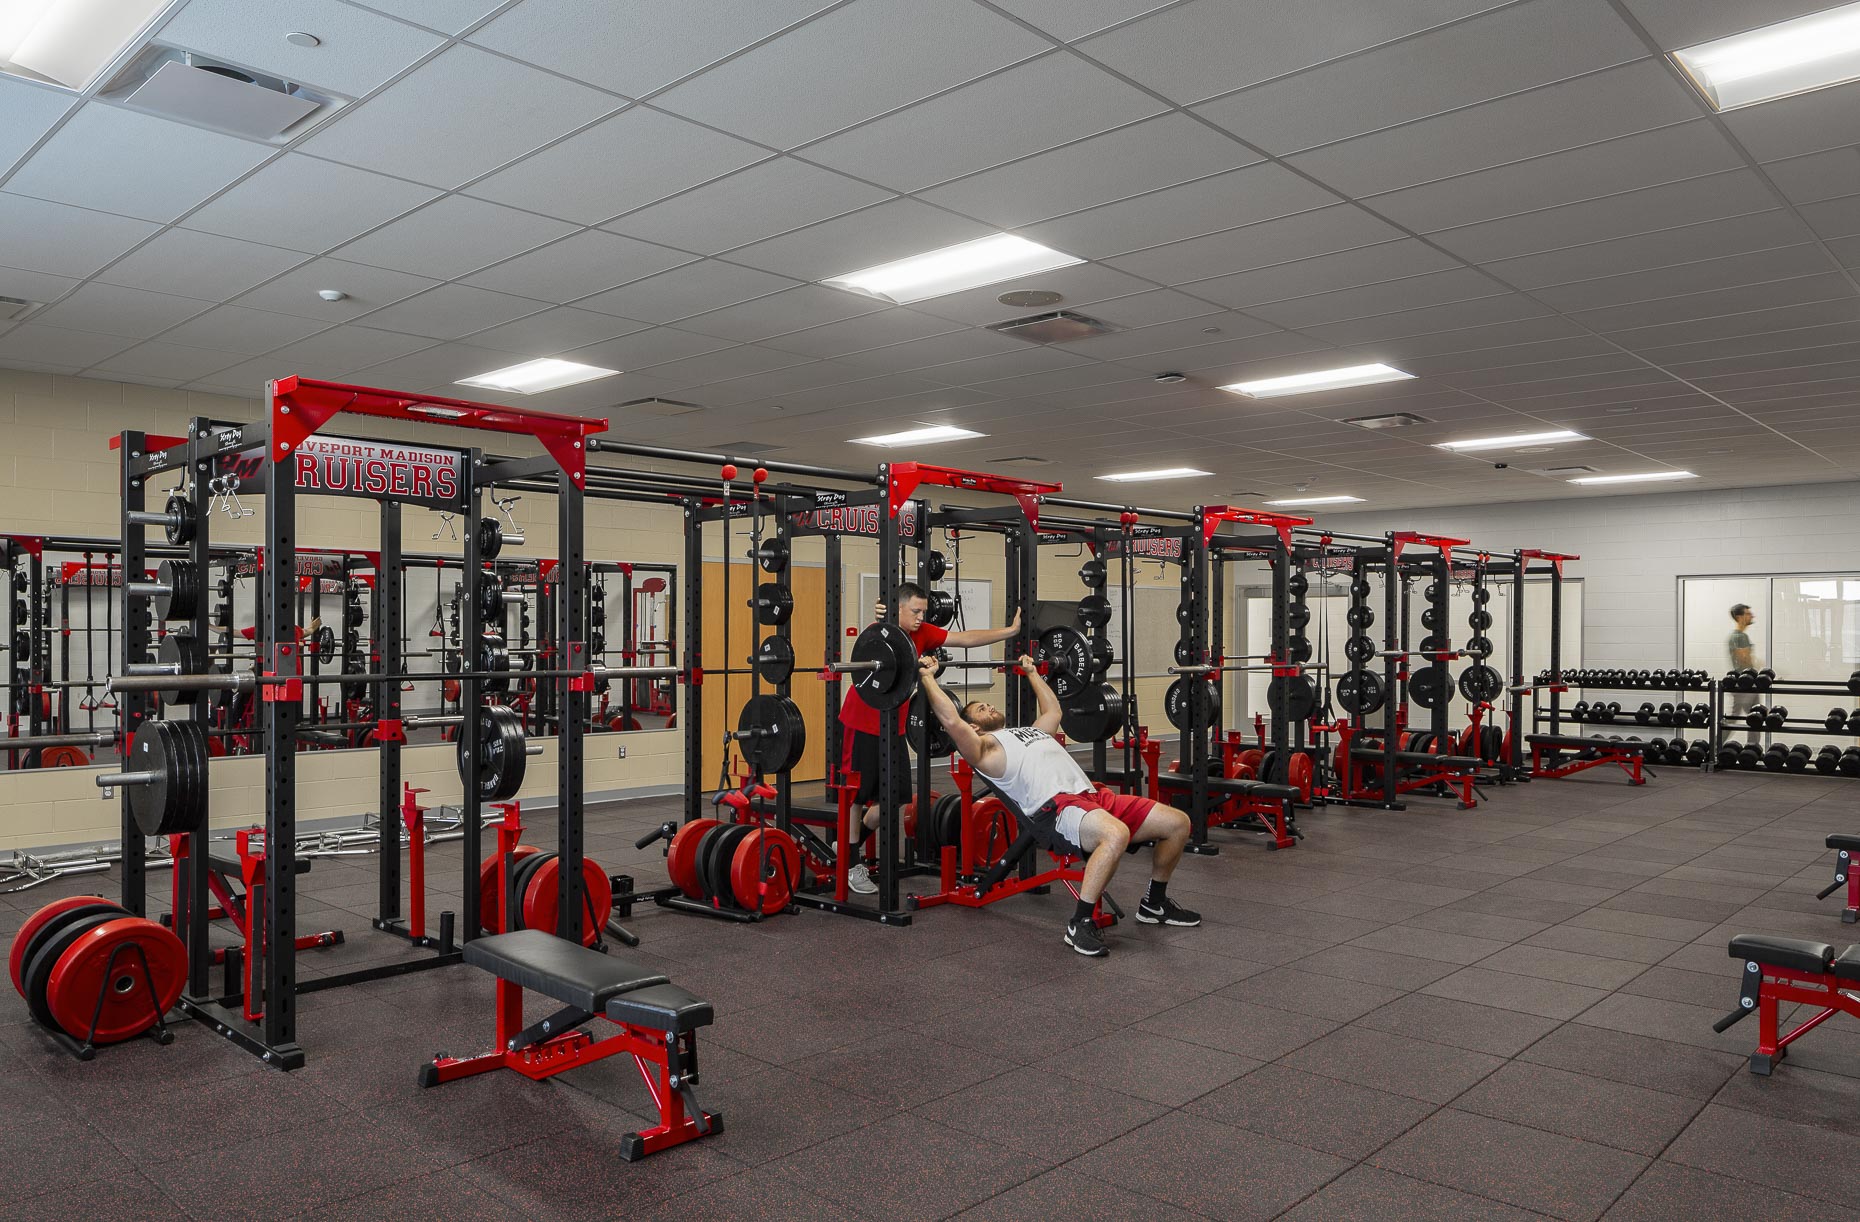 Groveport Madison High School by VSWC & Smoot Construction photographed by Lauren K Davis based in Columbus, Ohio